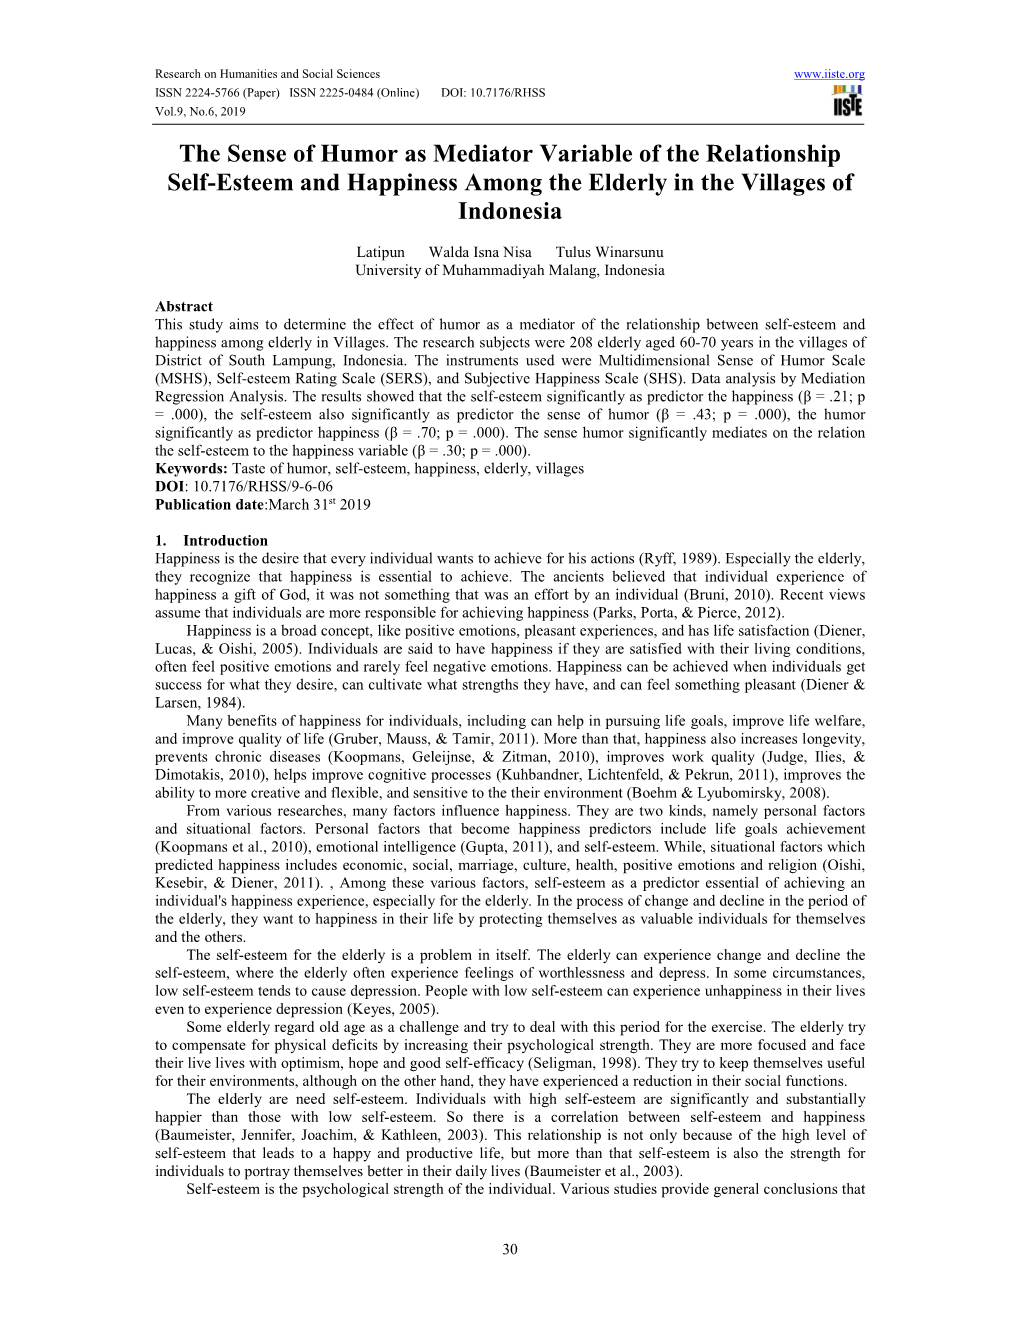 The Sense of Humor As Mediator Variable of the Relationship Self-Esteem and Happiness Among the Elderly in the Villages of Indonesia